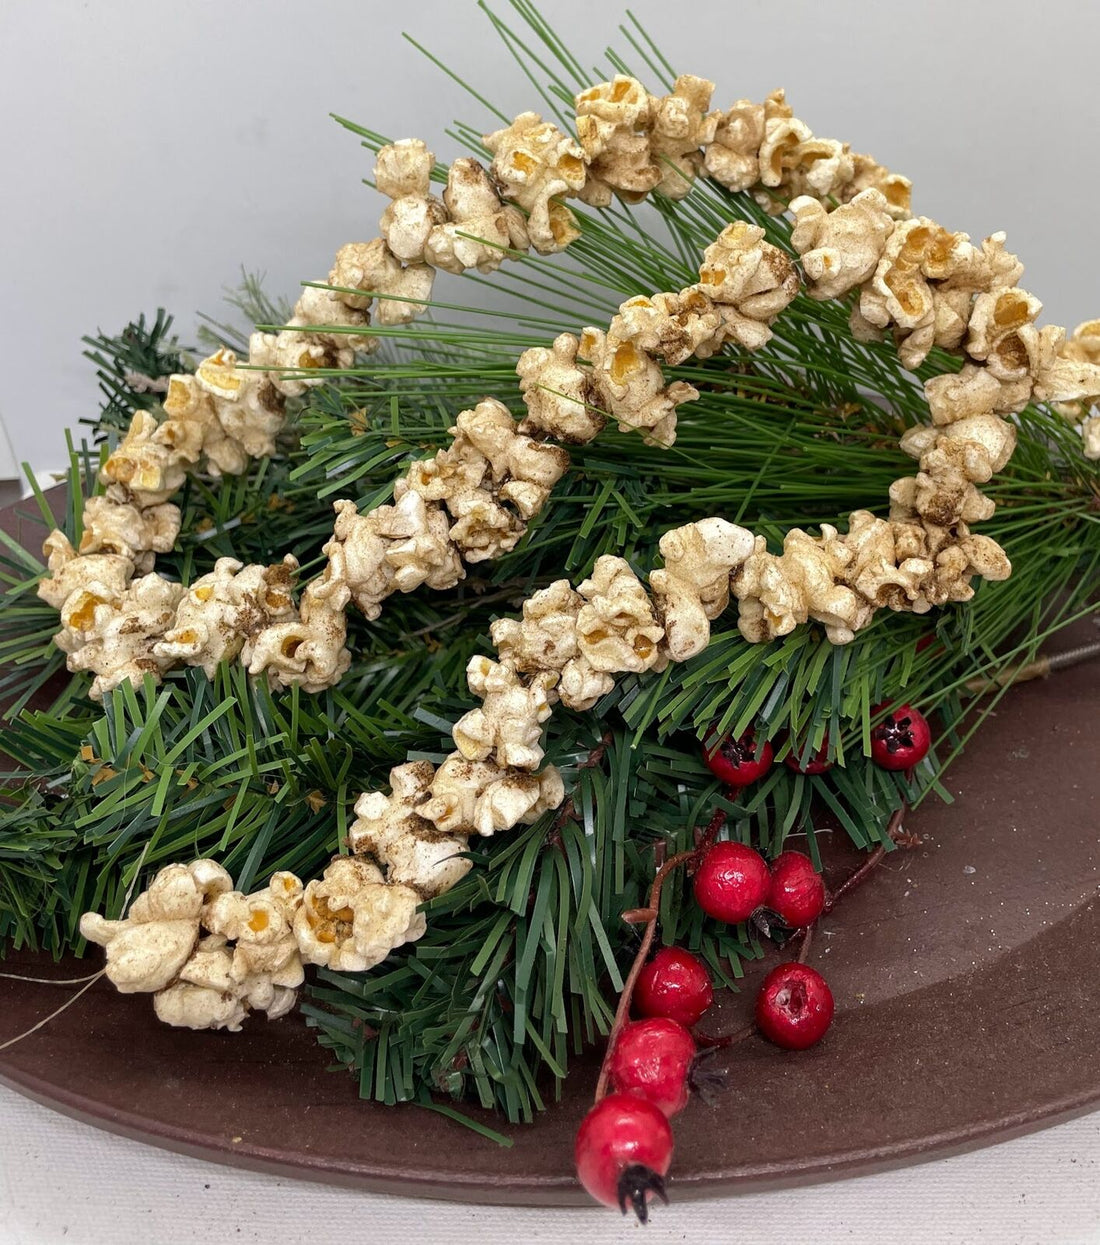 Primitive Colonial Christmas Wax Dipped Cranberry Spice 6 ft Popcorn Garland - The Primitive Pineapple Collection